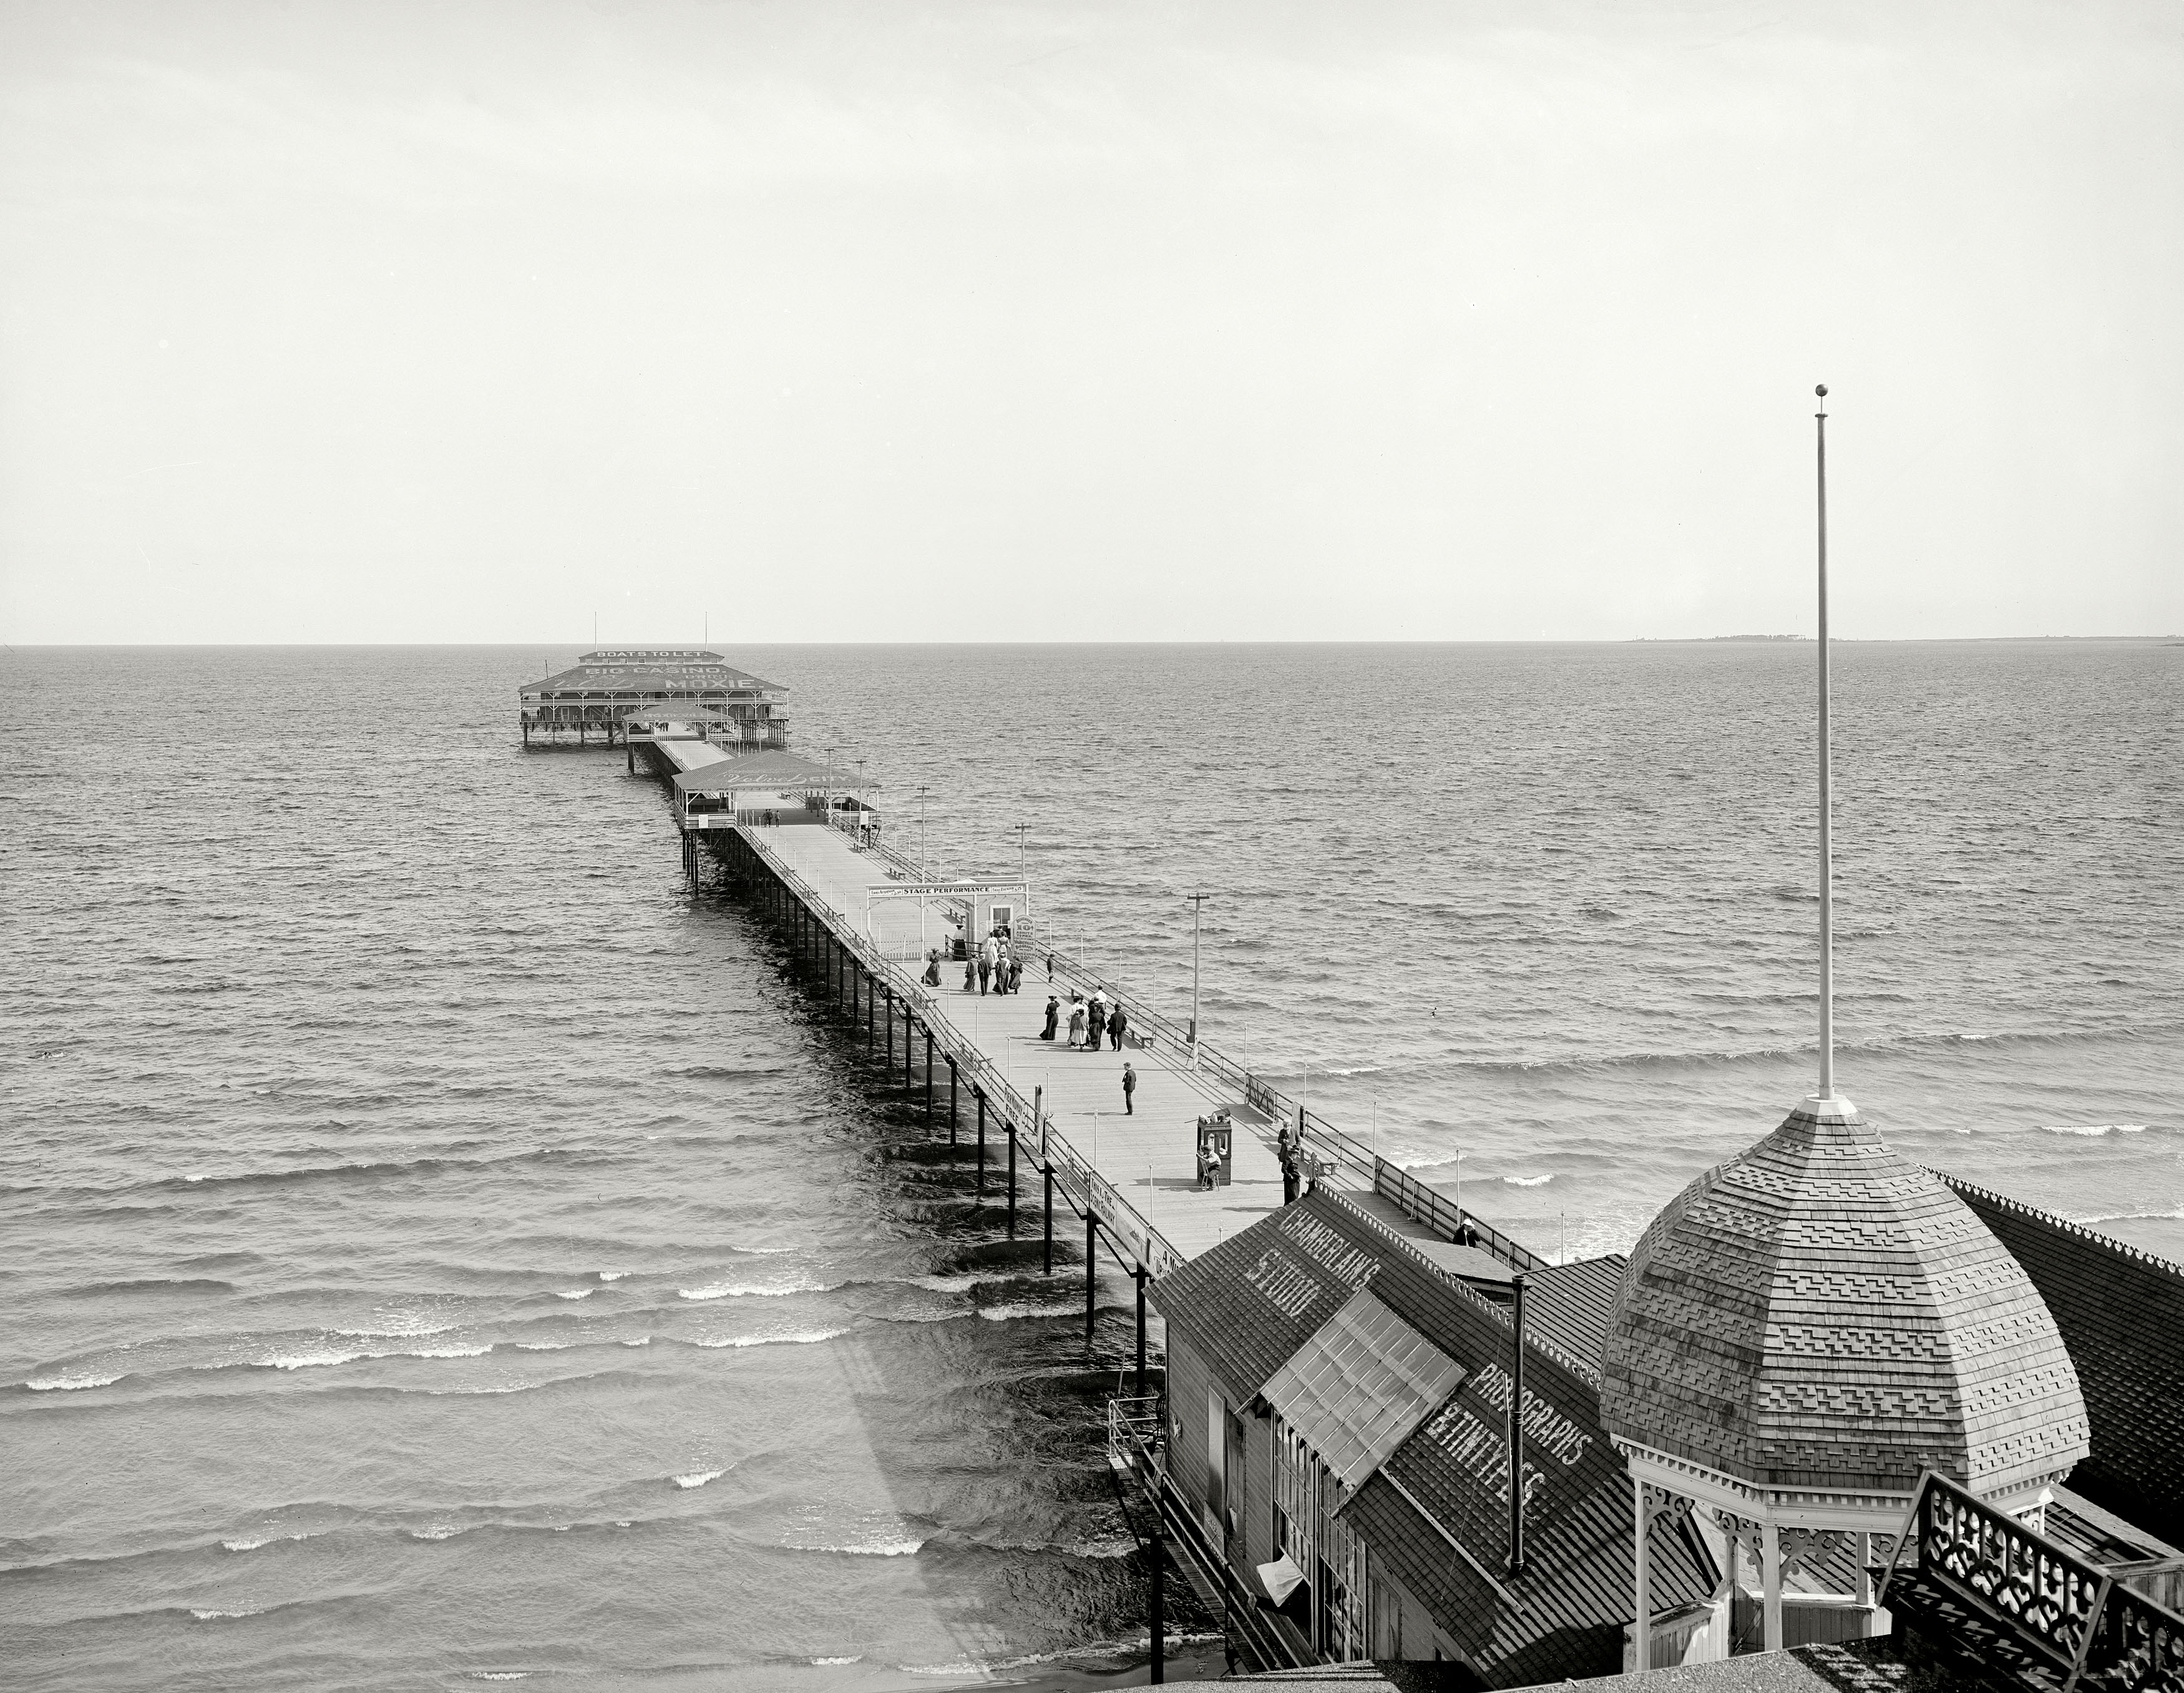 Circa 1904. "Old Orchard, Maine. Ocean Pier." After a long walk on this long pier: Drink Moxie! 8x10 inch glass negative, Detroit Publishing Co. View full size.